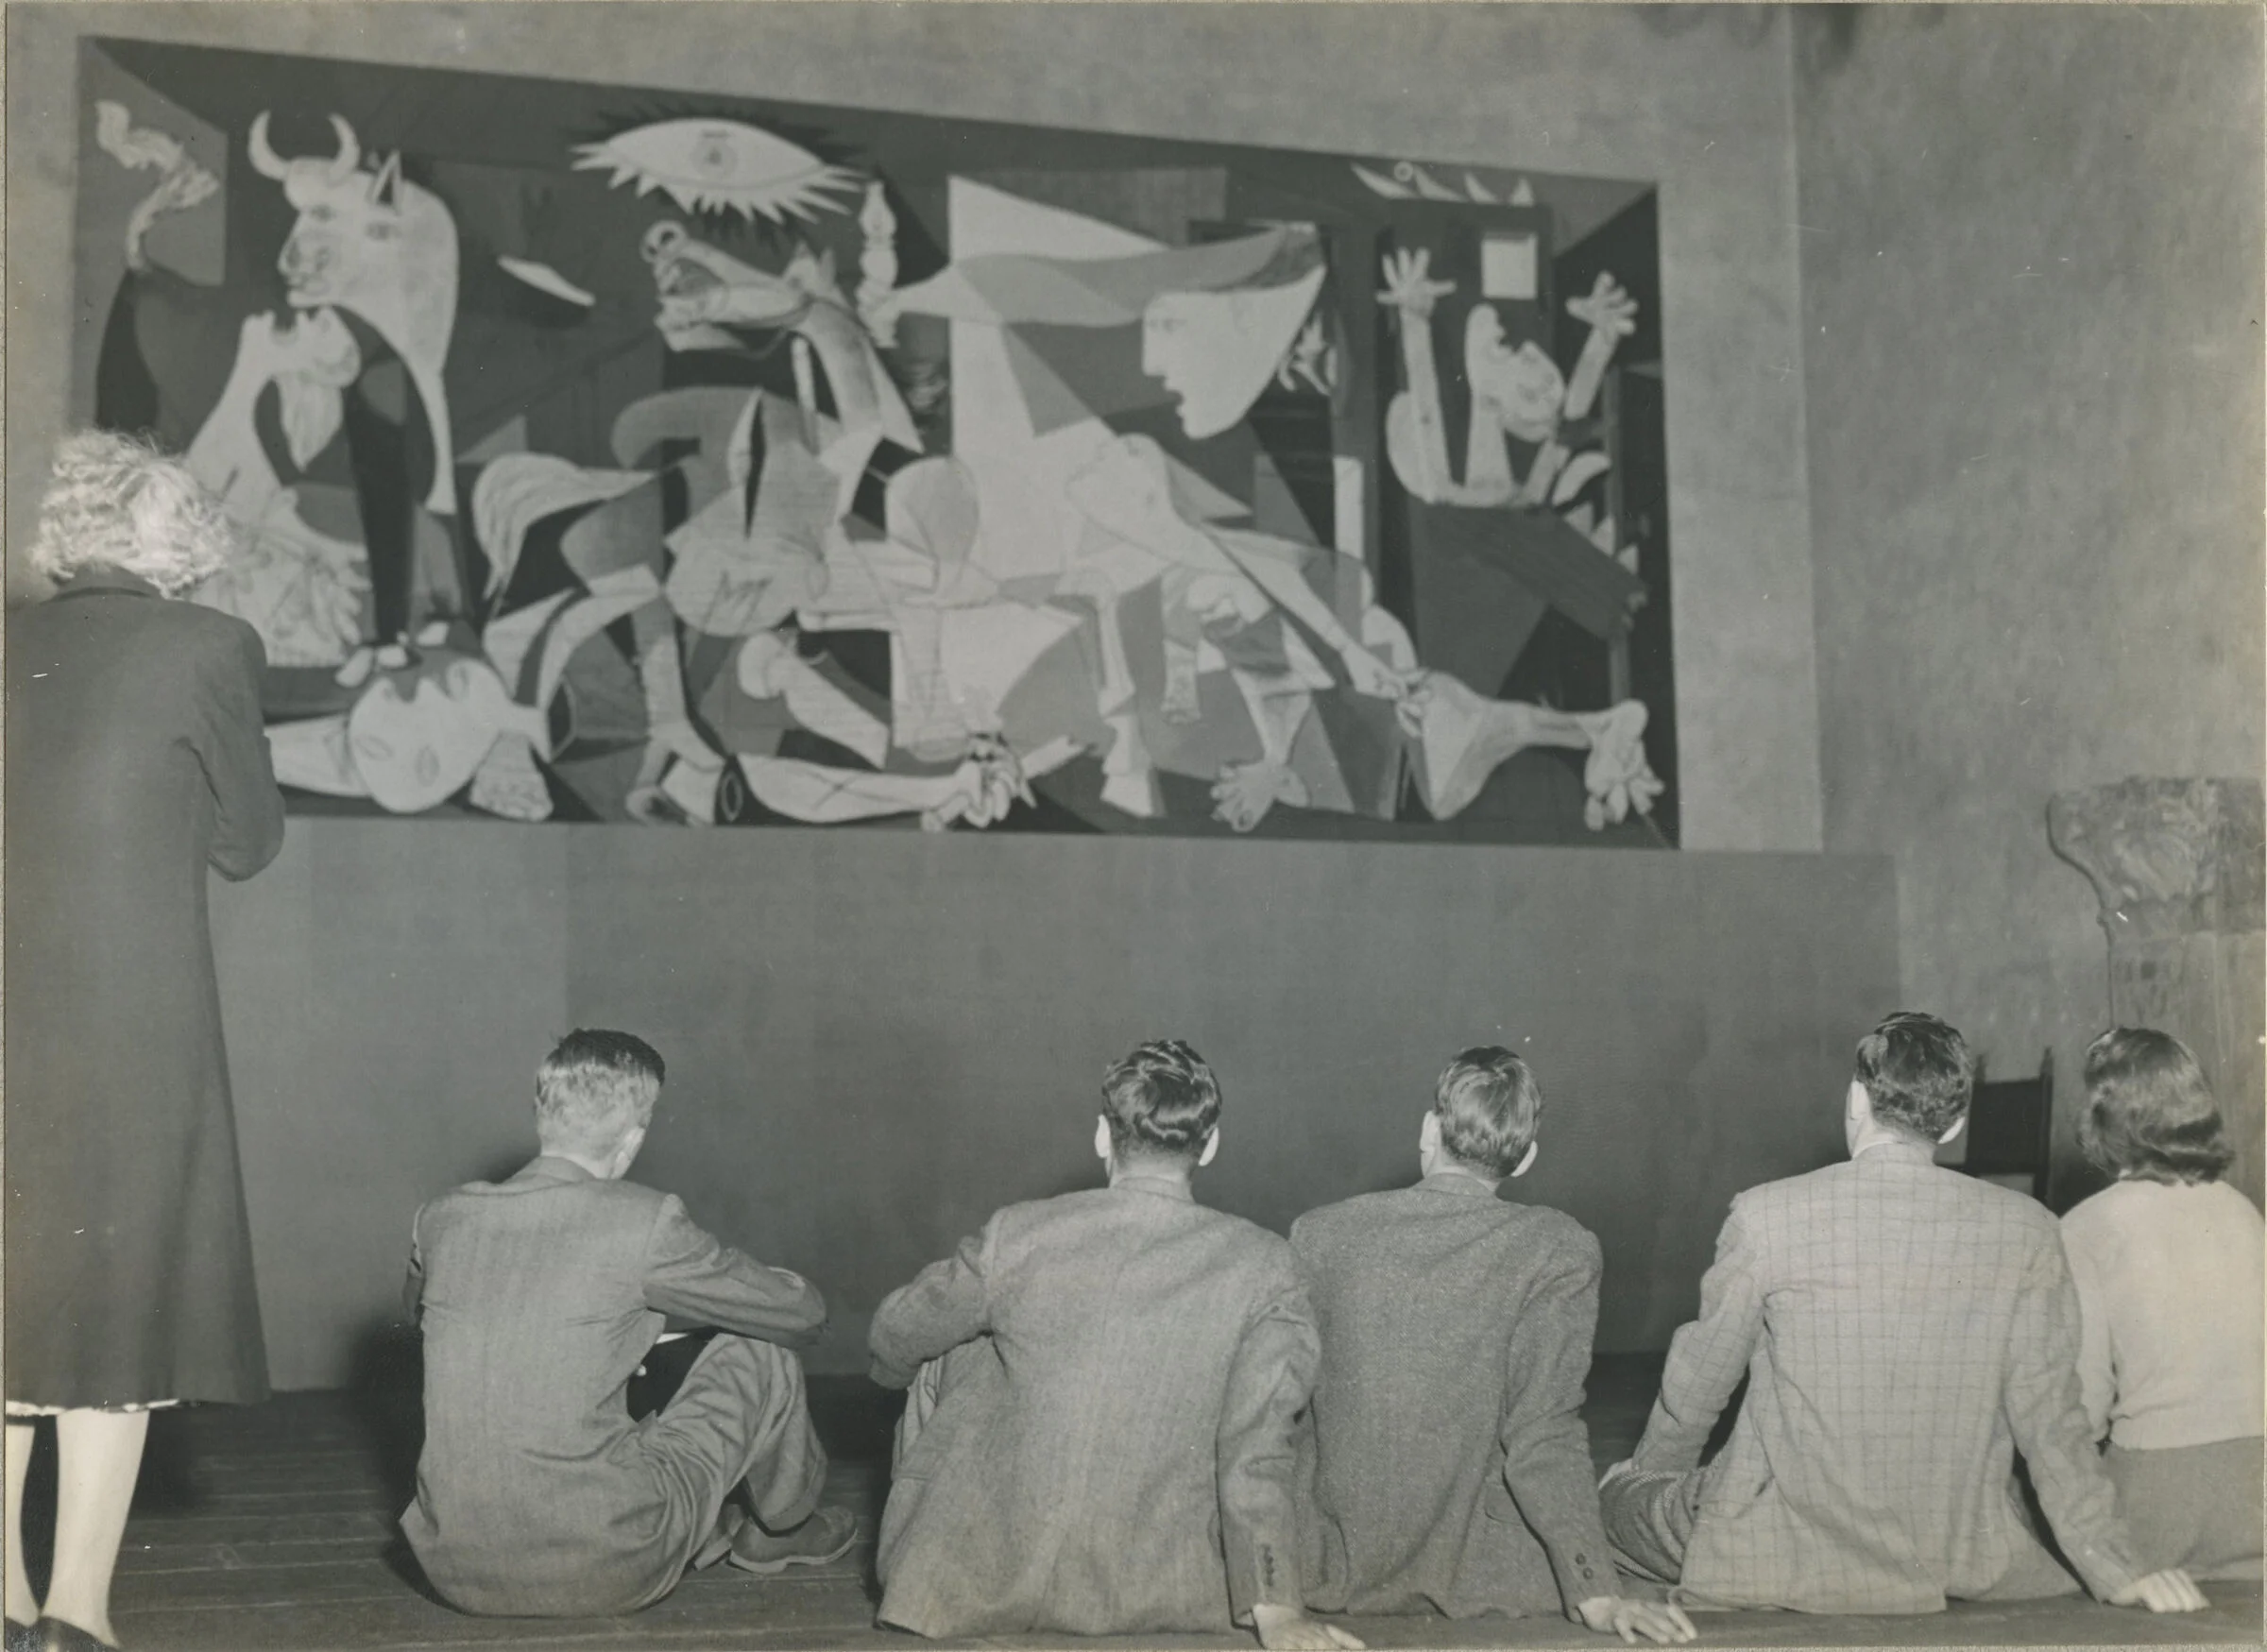 The Effects of Picasso: Remembering Guernica at Harvard